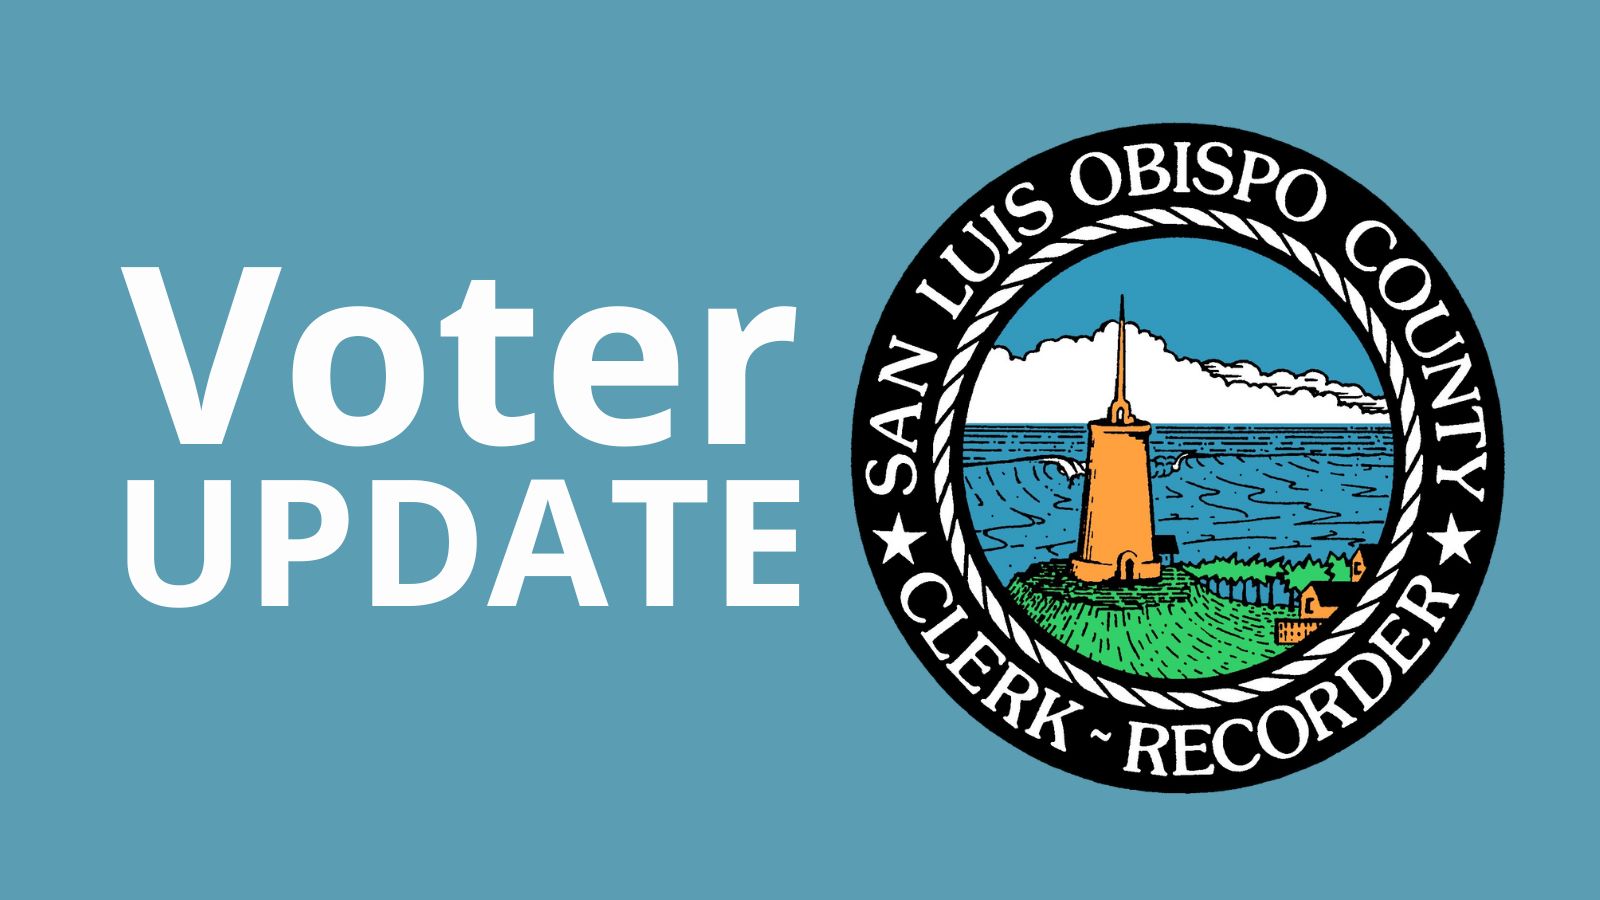 Text that says Voter Update next to official Clerk-Recorder seal